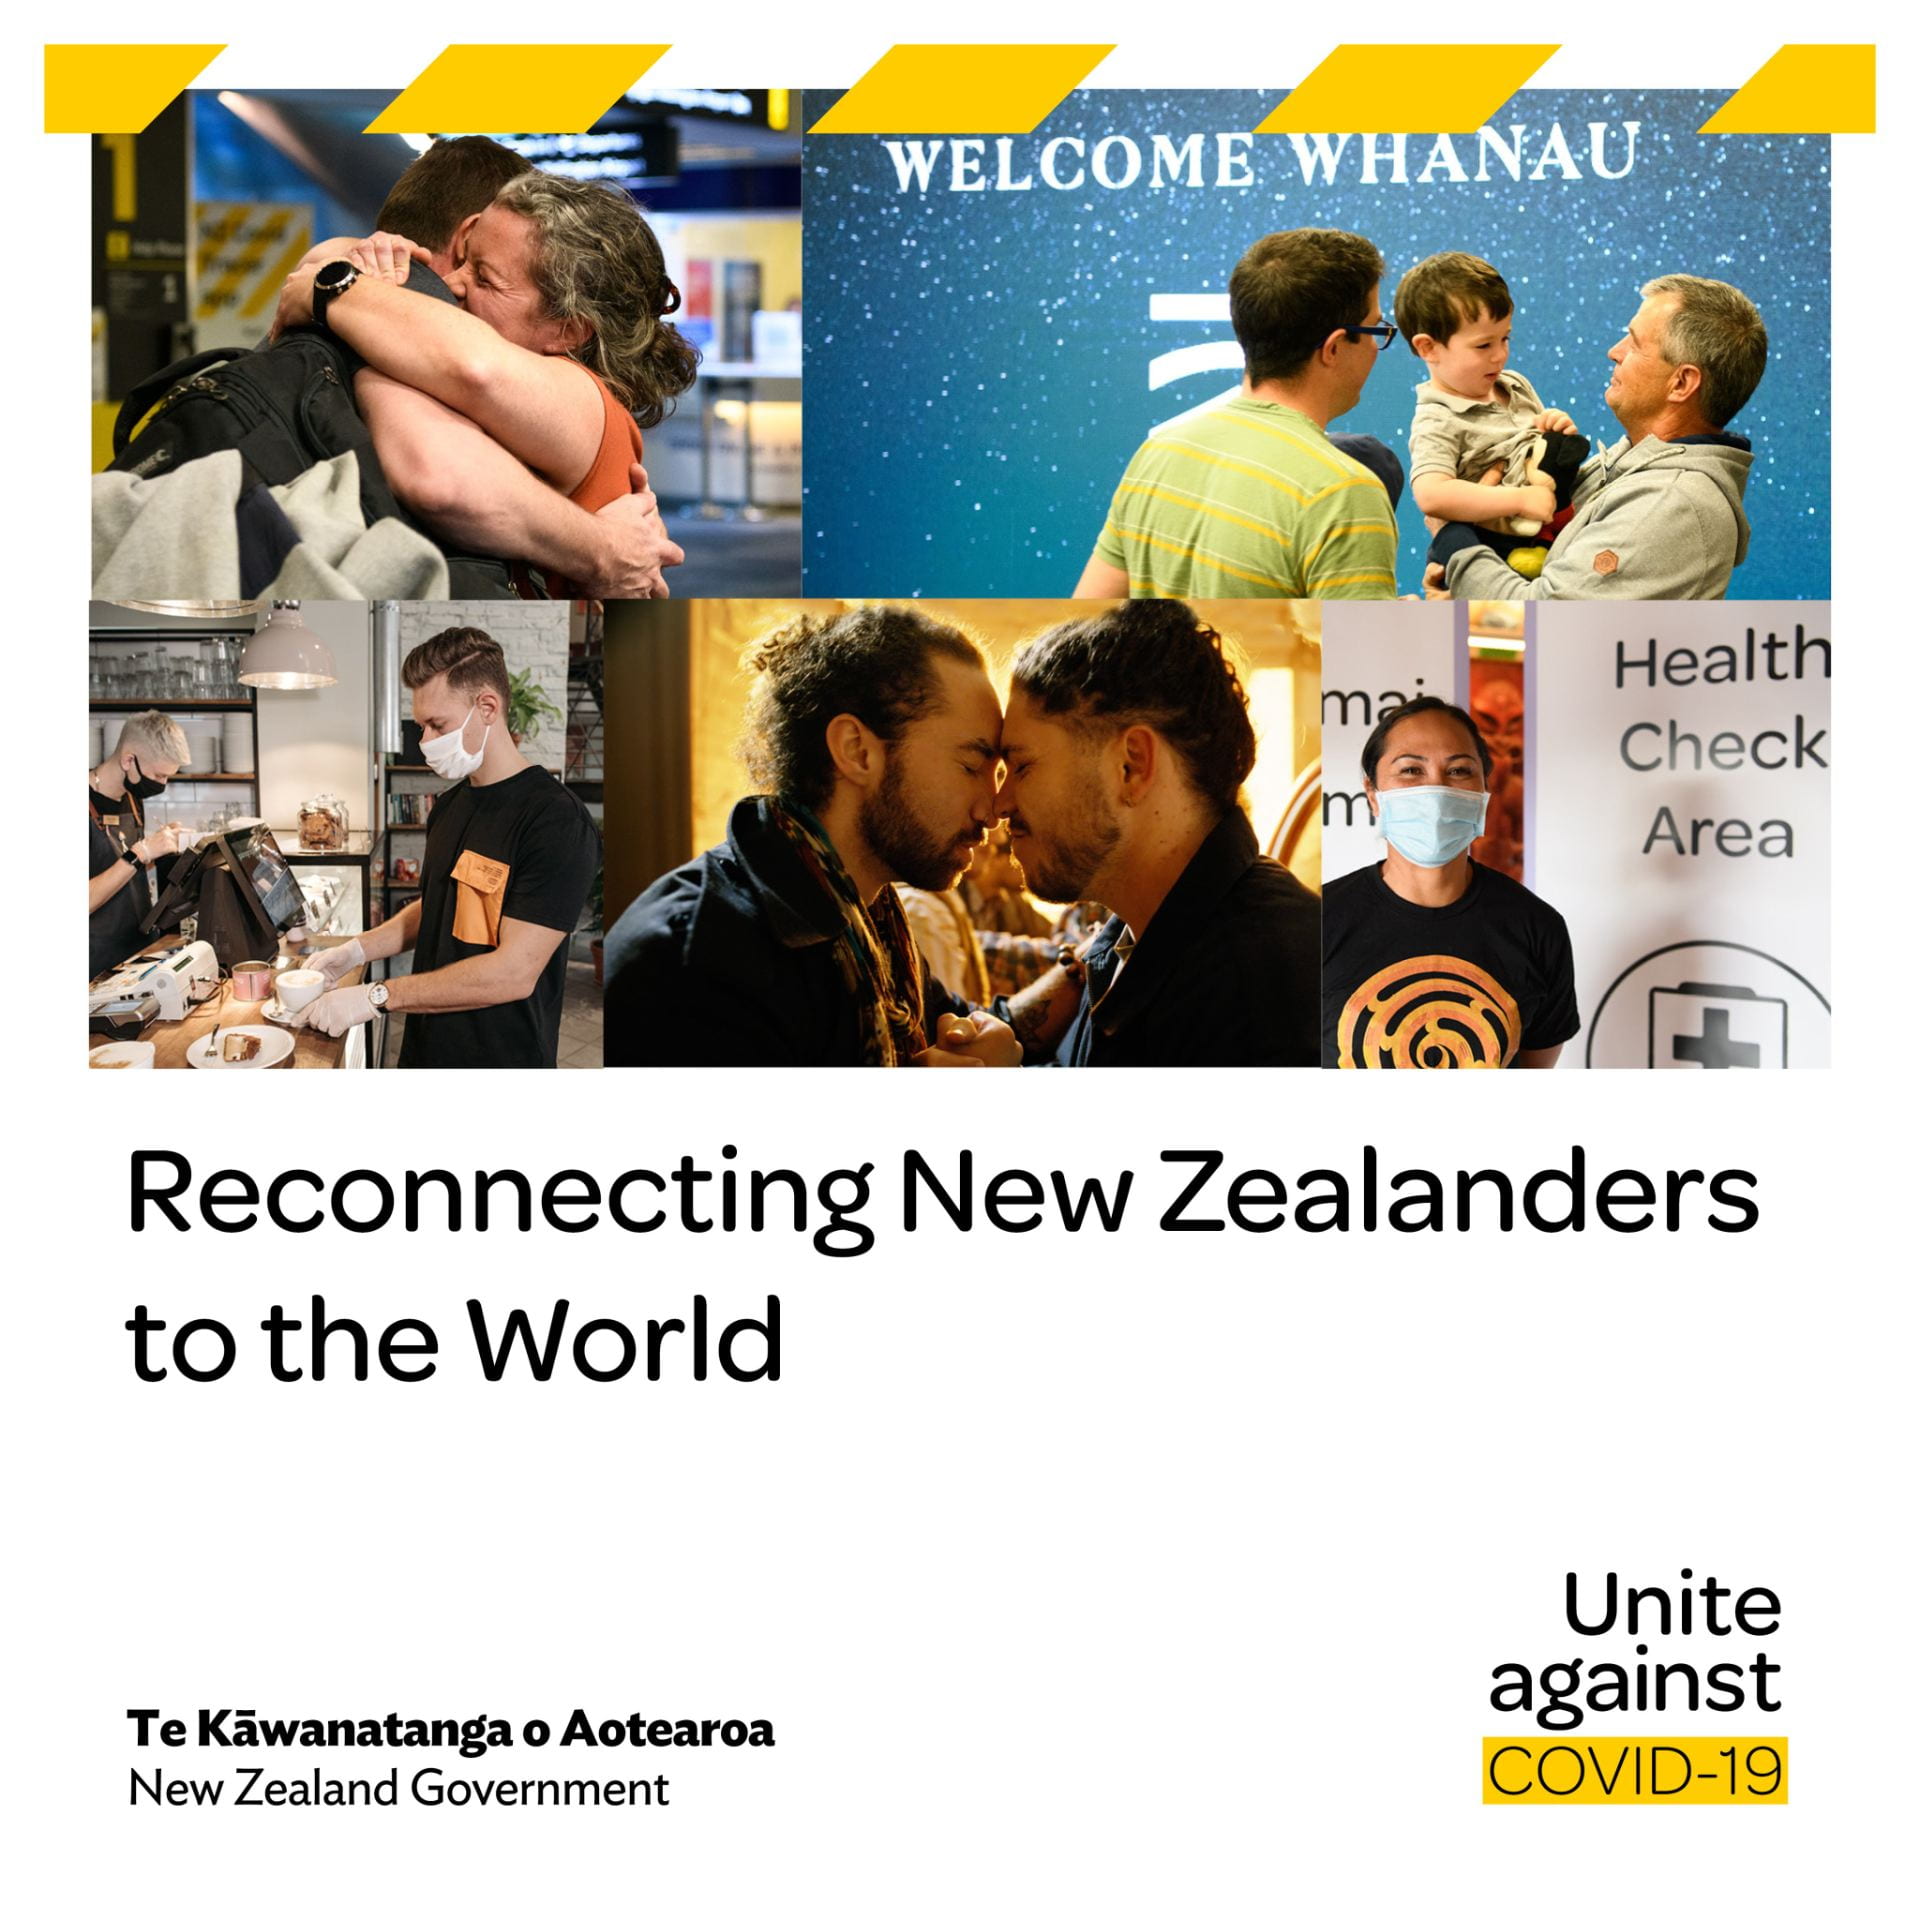 Reconnecting New Zealanders to the world flyer, depicting families embracing, a couple greeting each other with a hongi